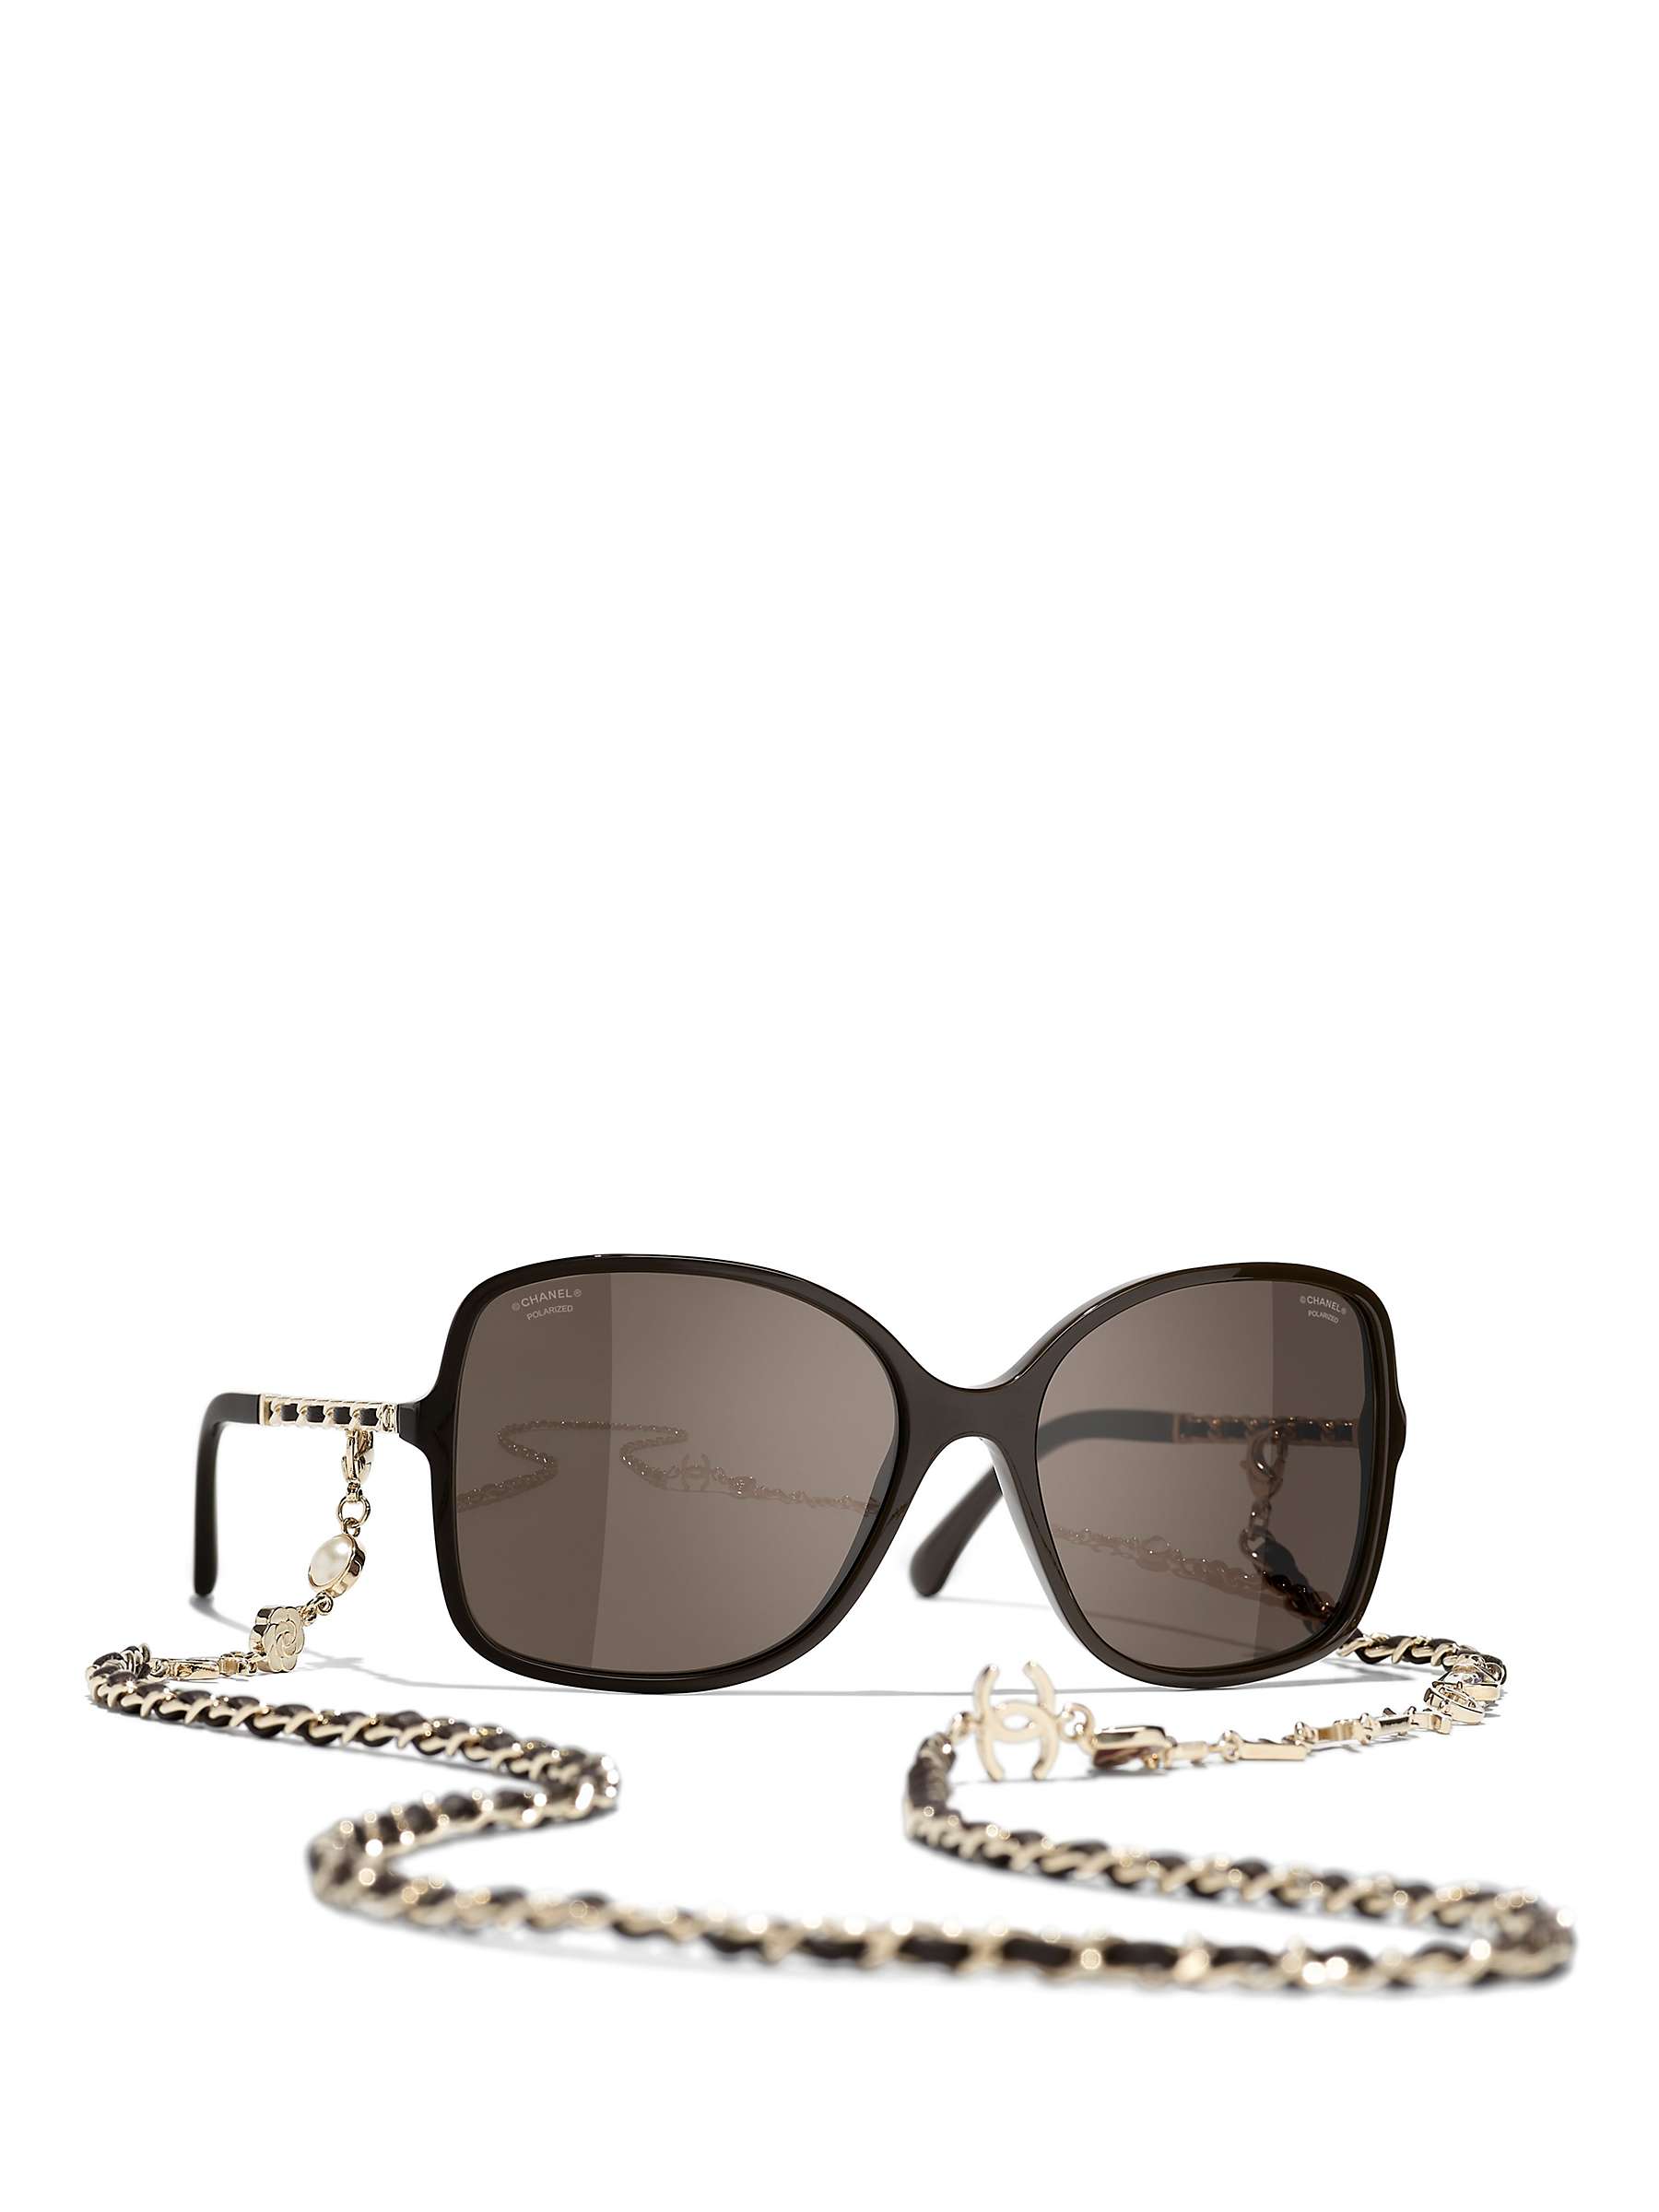 Buy CHANEL Square Sunglasses CH5210Q Brown Online at johnlewis.com